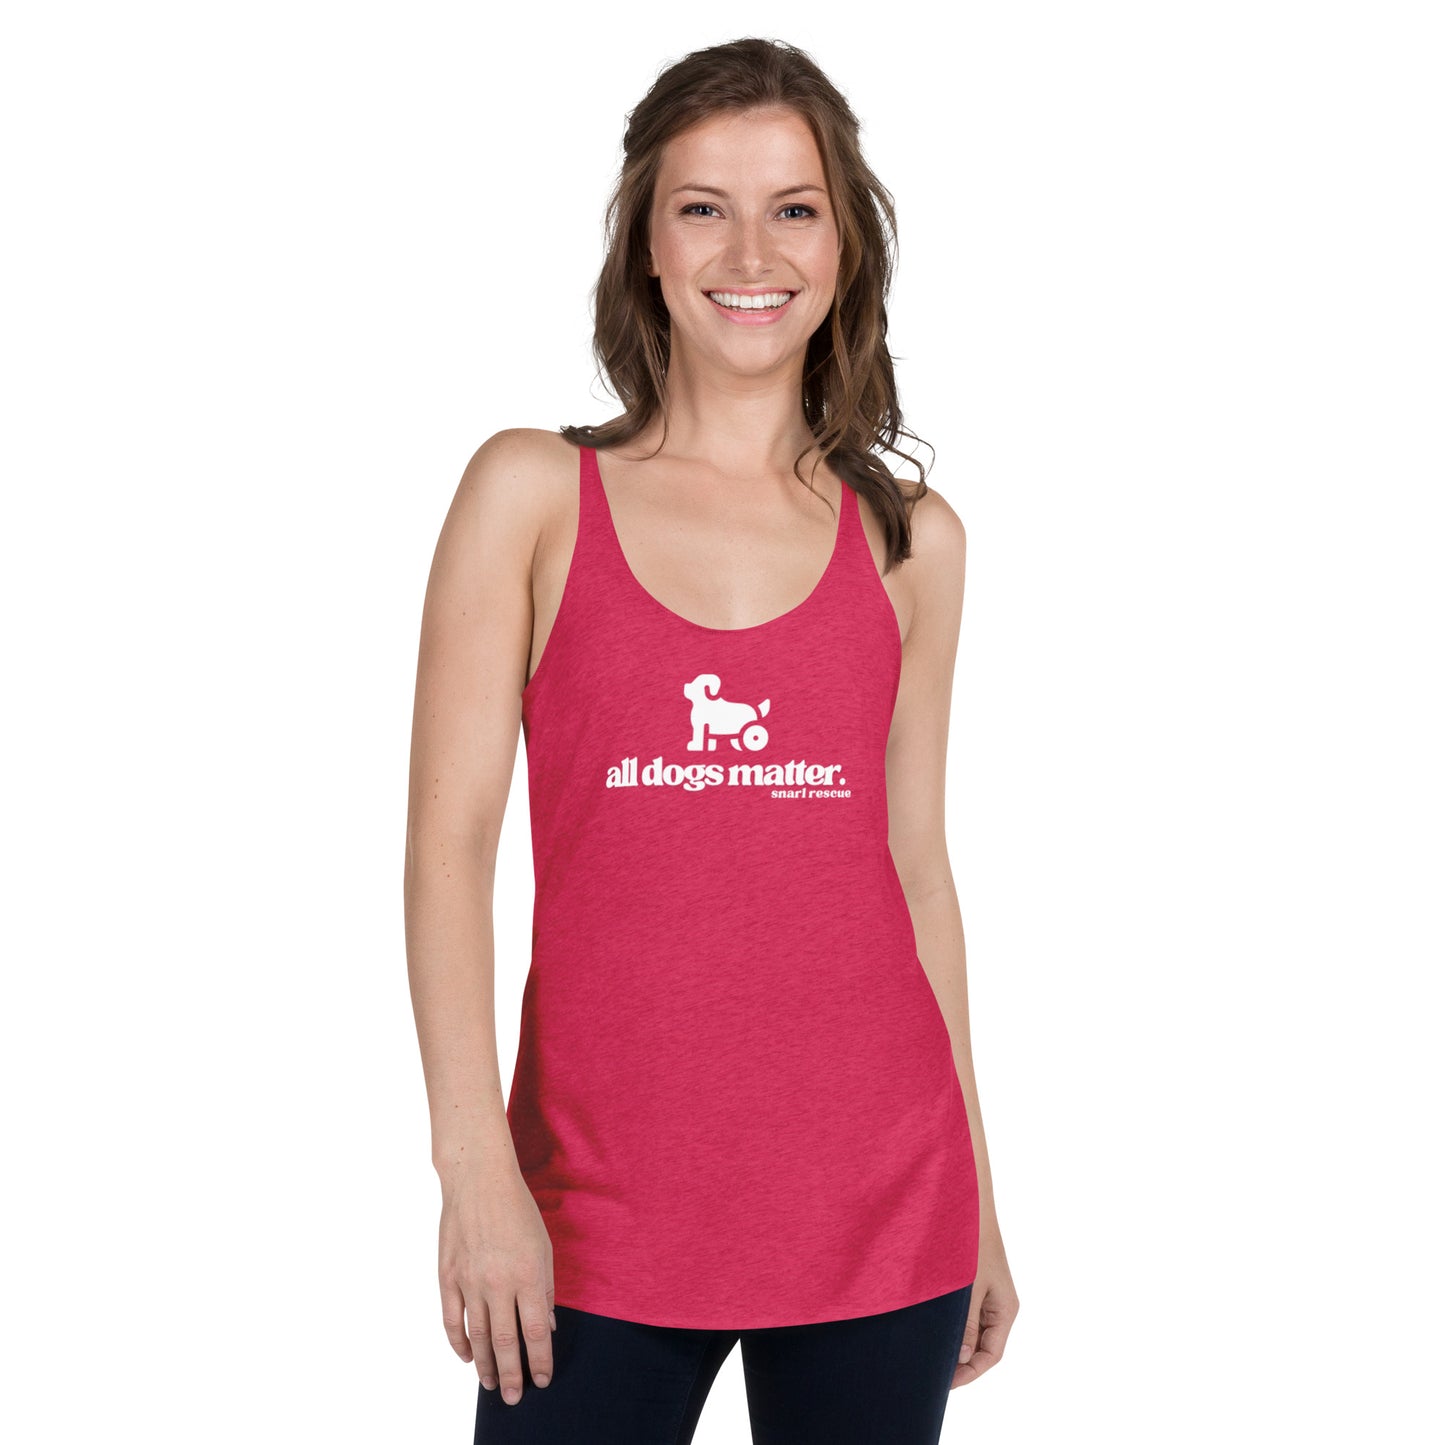 The All Dogs Matter Tank